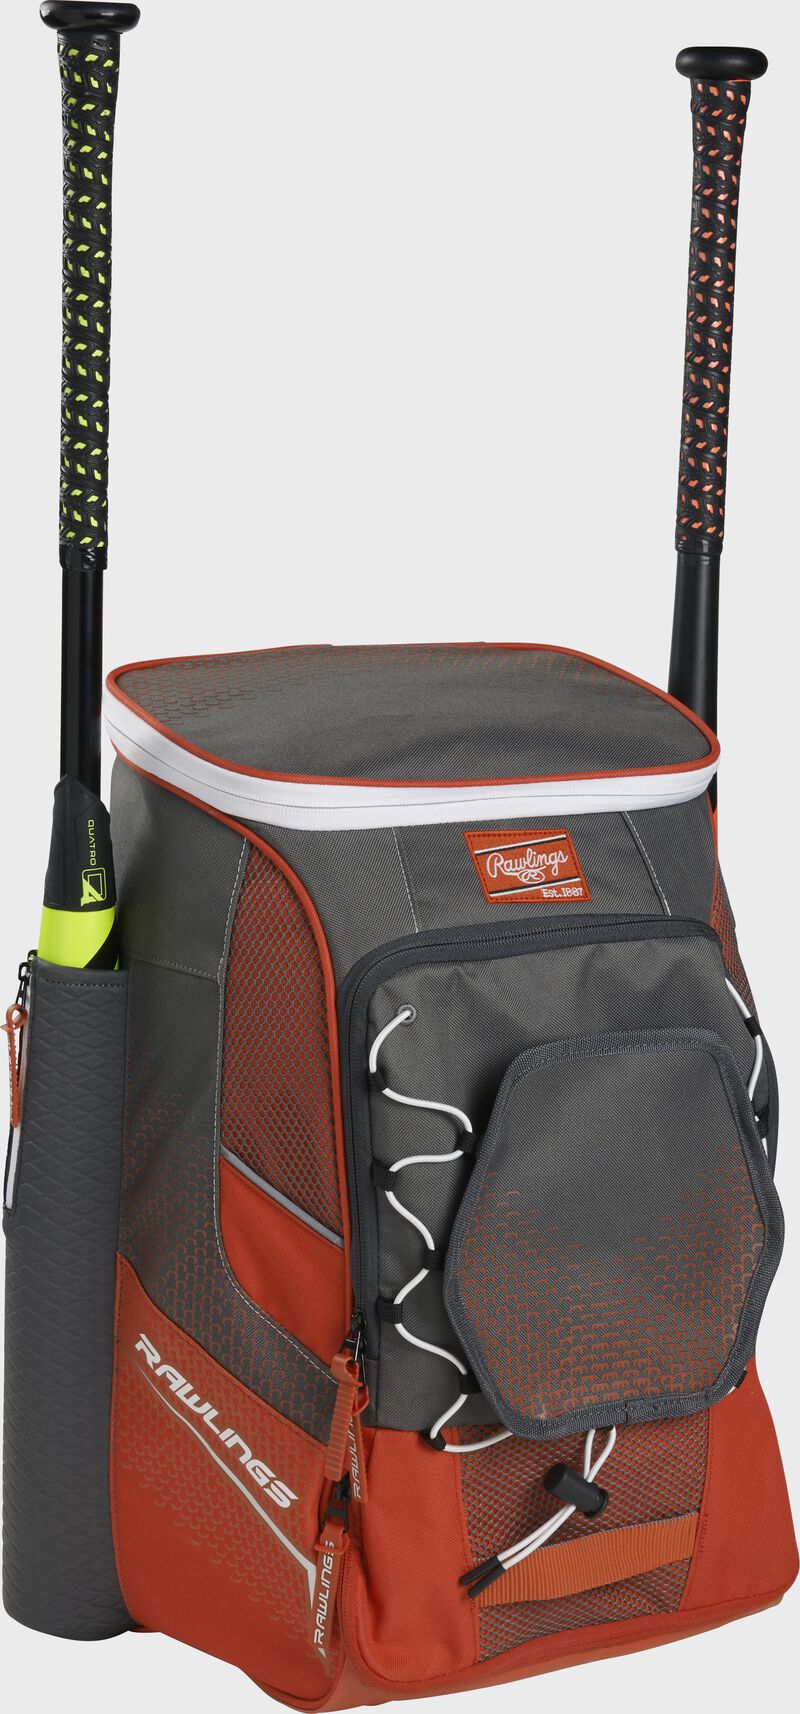 Front left angle of an orange Rawlings Impulse baseball gear backpack with two bats - SKU: IMPLSE-BO image number null